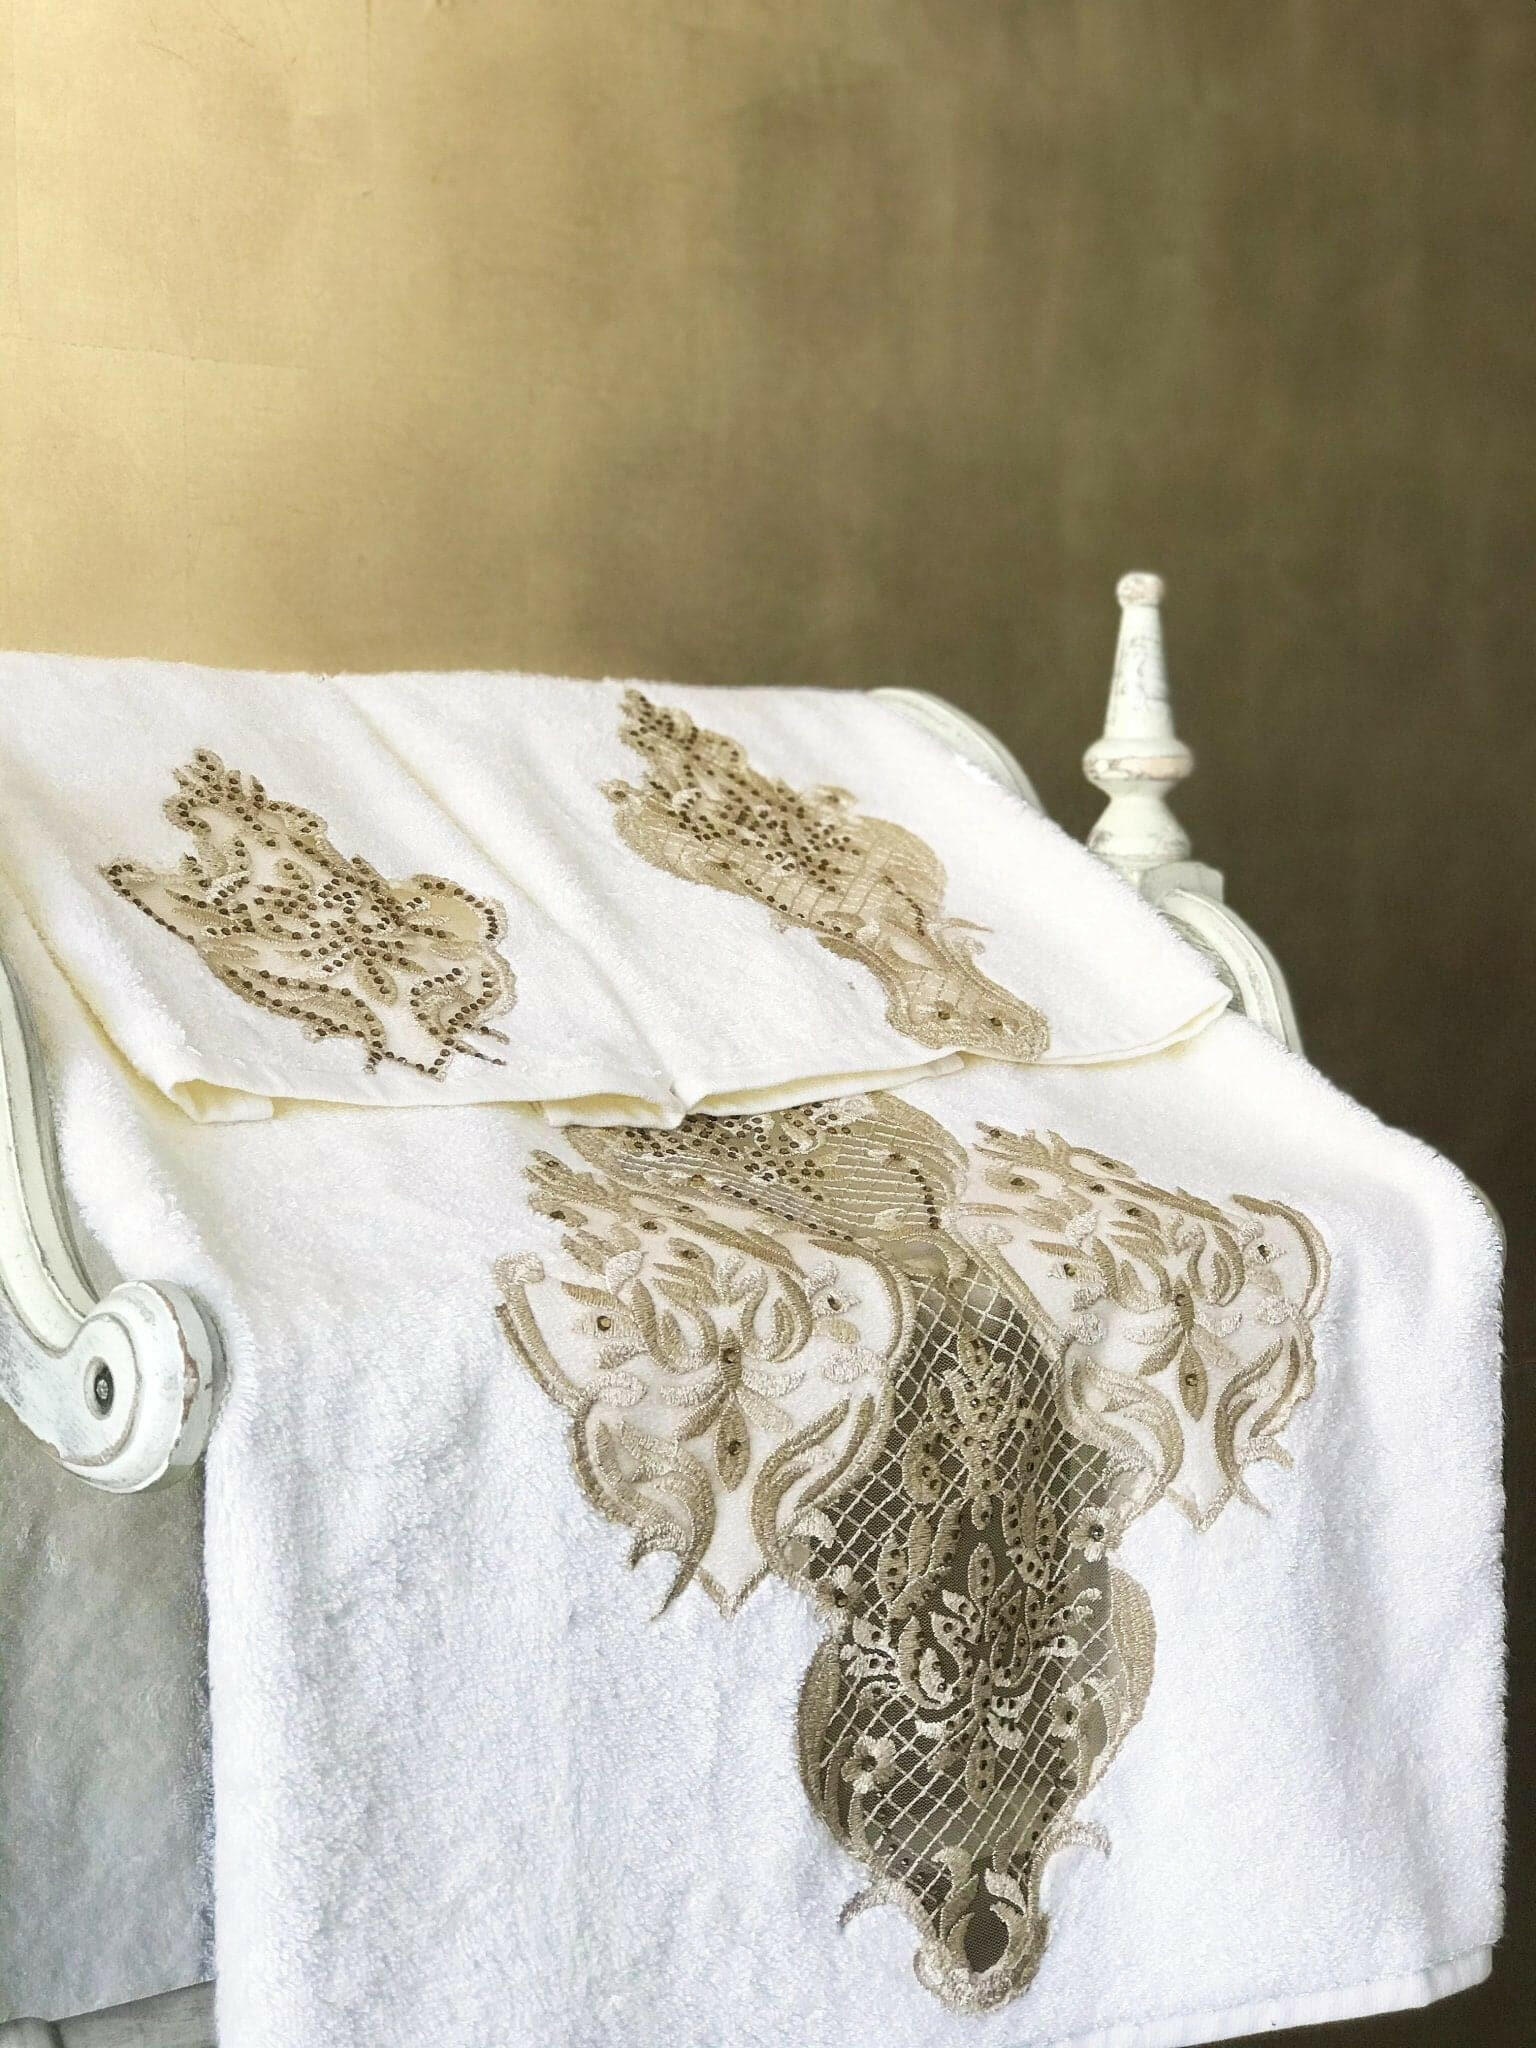 Ece European Style Luxury Embroidery Lace 3 Piece Elegant Bathroom Towel Set by Creative Home, Gold Color Embroidery with Crystals,TS-CH-ECE-Go